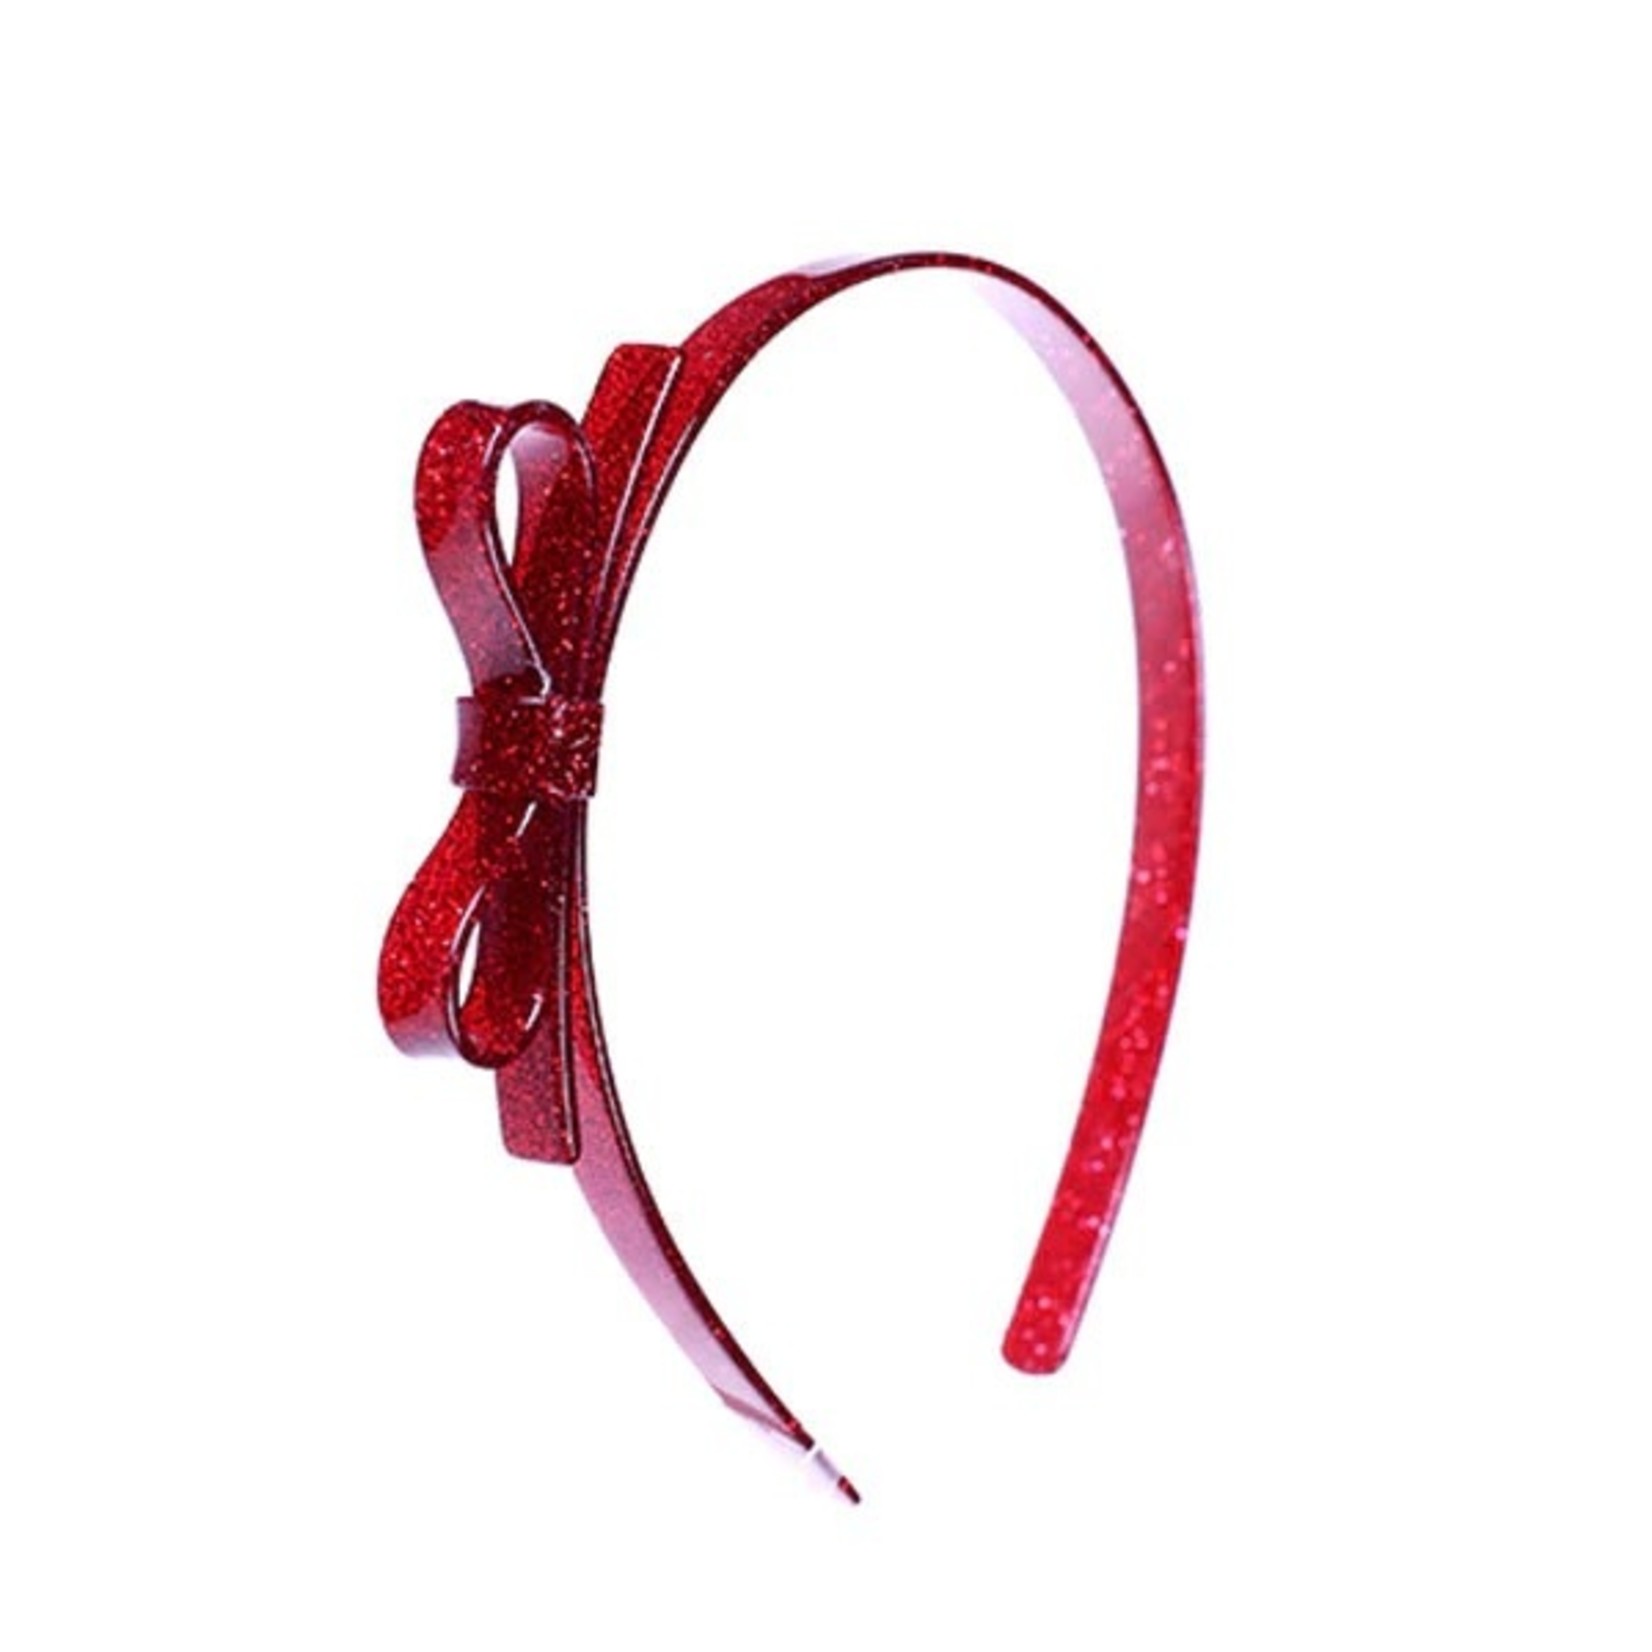 Lilies & Roses Thin Bow Headband-Red Glitter